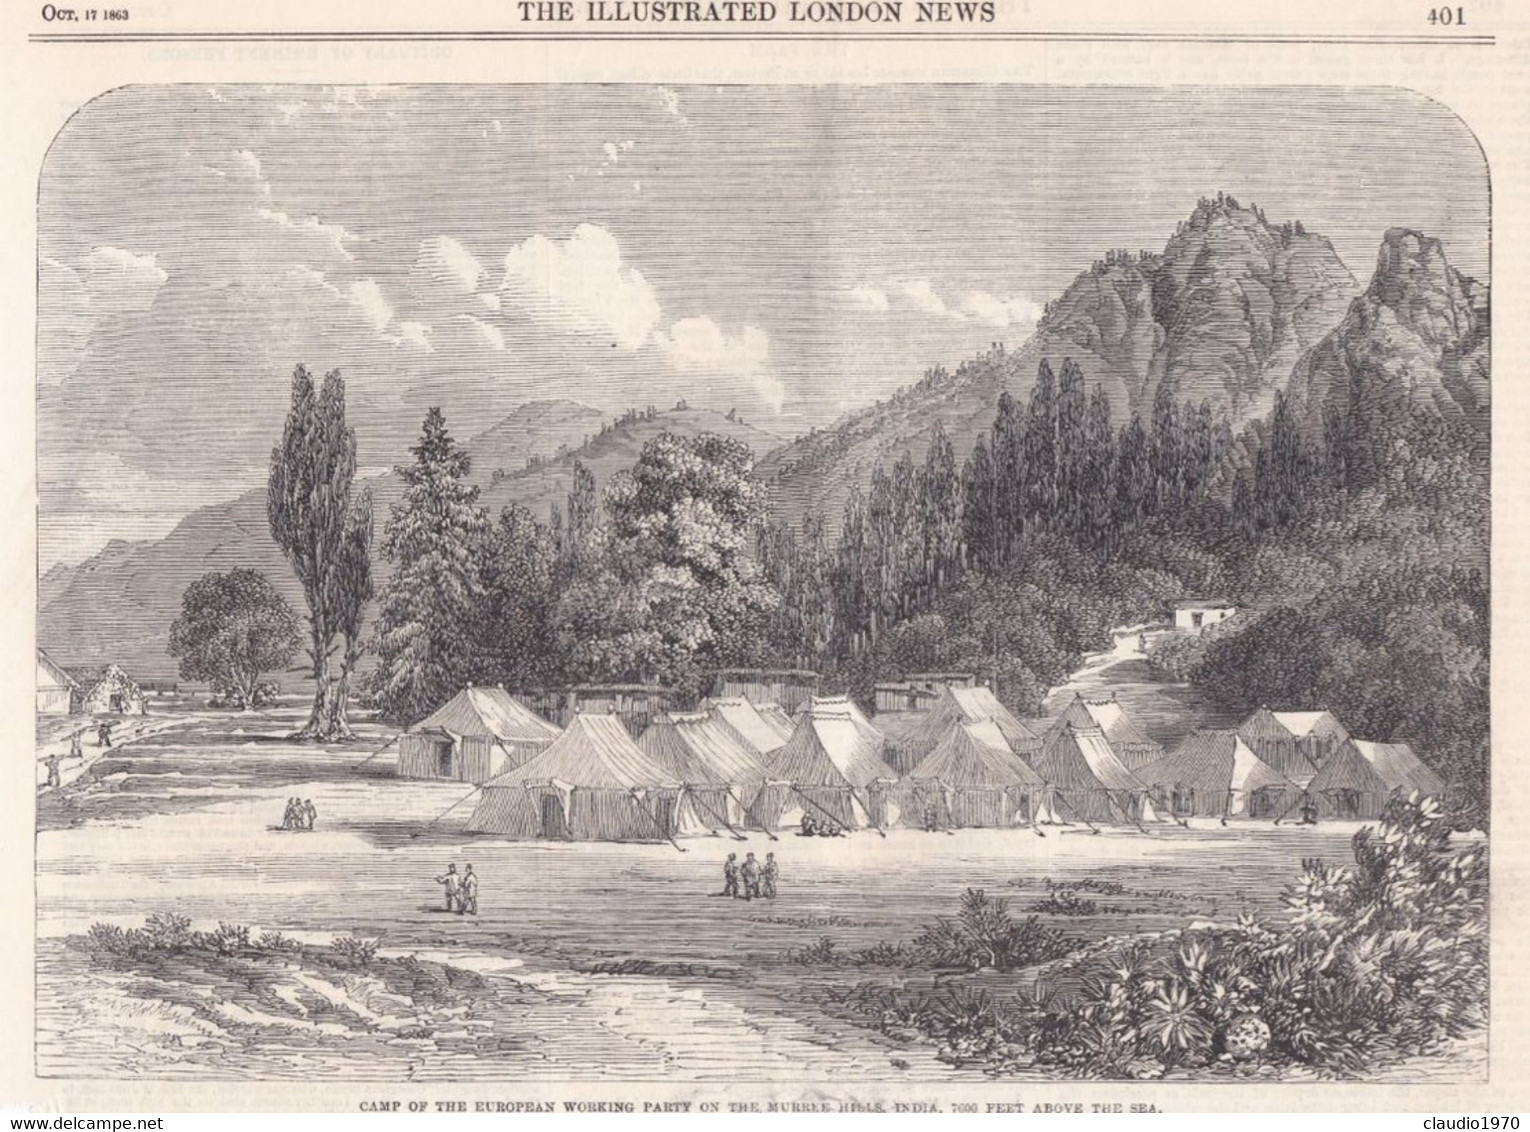 THE ILLUSTRATED LONDON NEWS  - RITAGLIO - STAMPA -CAMP OF EUROPEAN WORKING PARTY ON THE MURREE HELLES INDIA 700 - Sin Clasificación